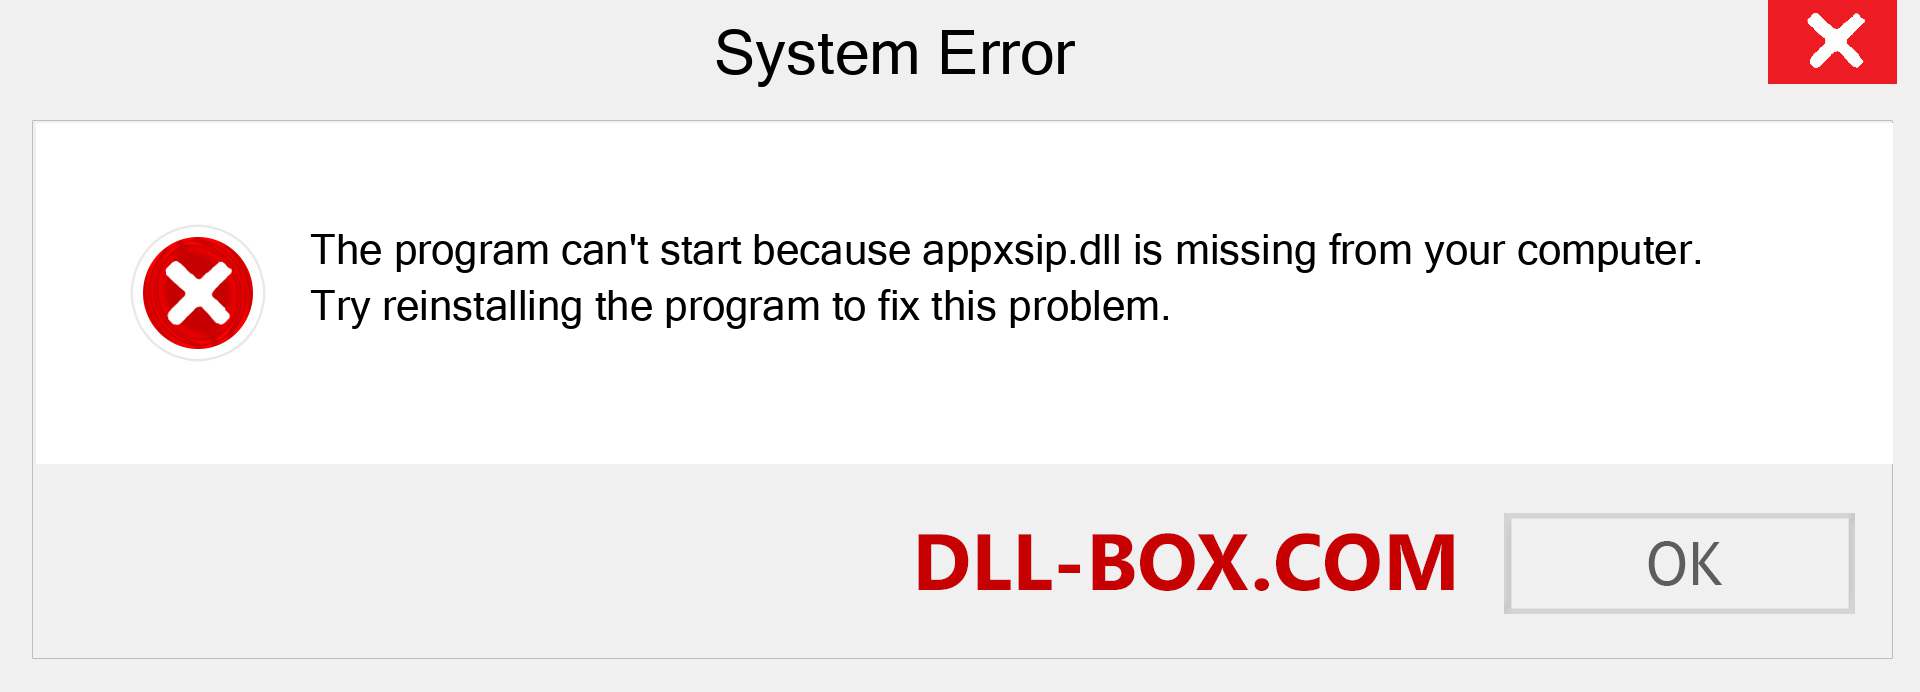  appxsip.dll file is missing?. Download for Windows 7, 8, 10 - Fix  appxsip dll Missing Error on Windows, photos, images